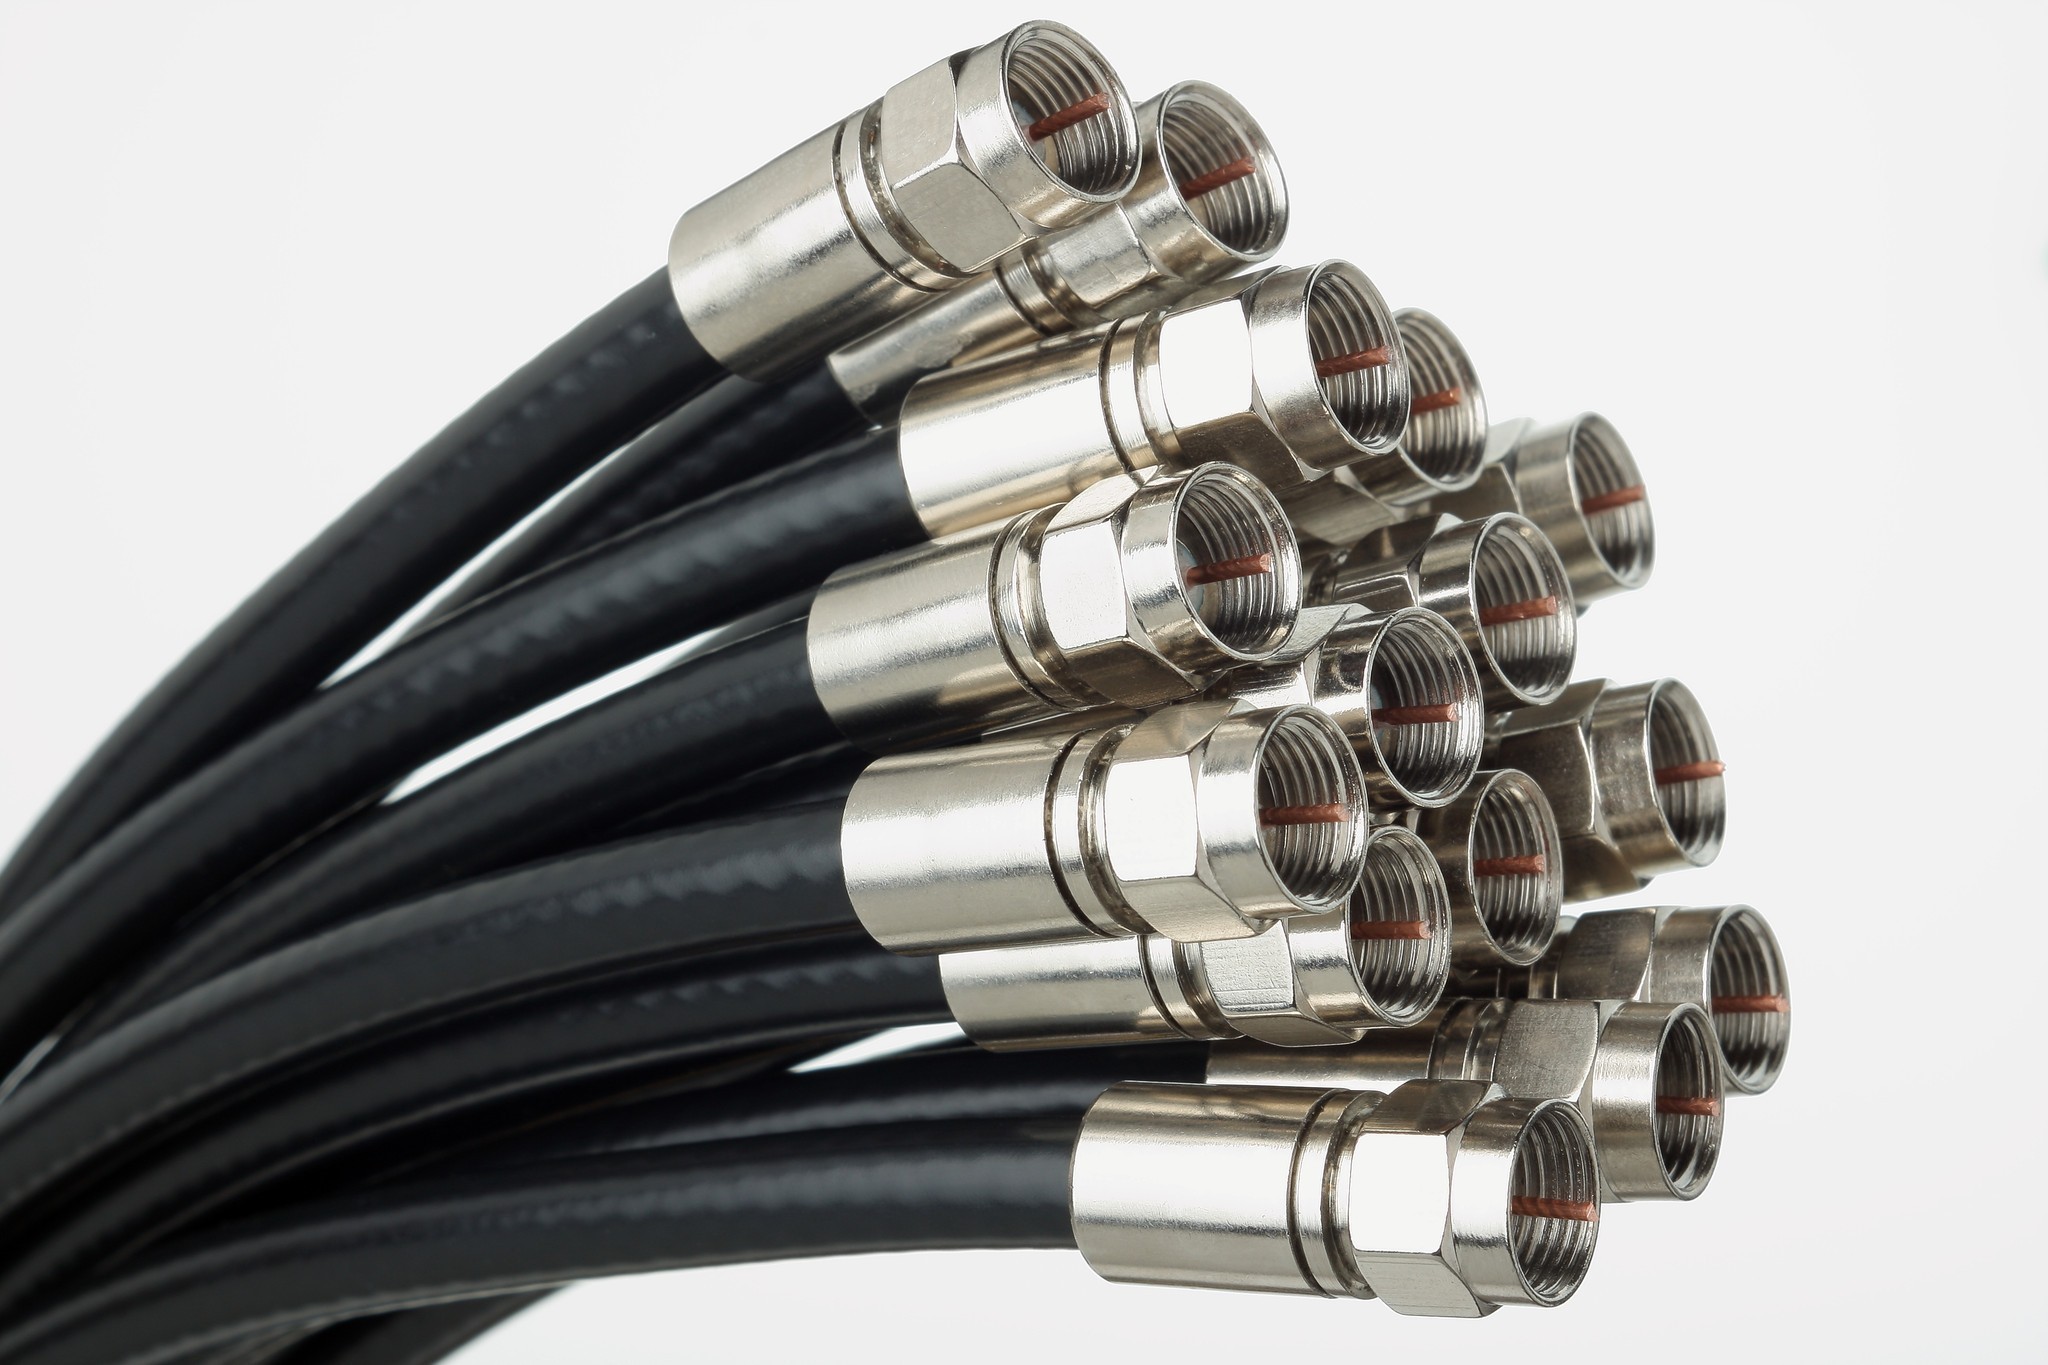 what-two-connector-types-are-typically-used-to-terminate-rg6-and-rg59-cables